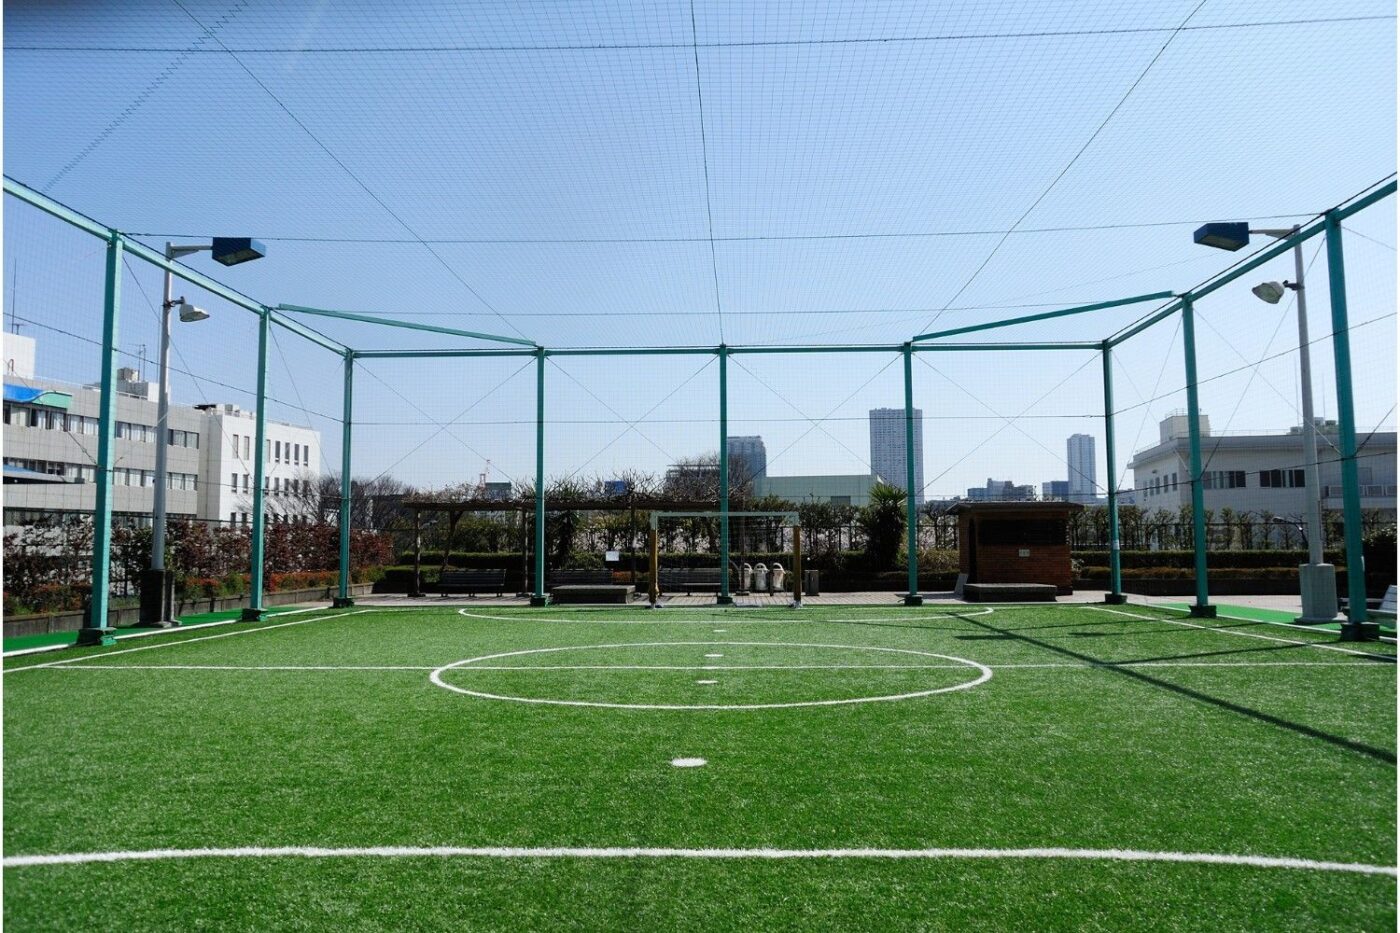 An outdoor rooftop soccer field with green artificial turf offers a dynamic outdoor living space. The field is enclosed by a net and green metal fencing, with buildings and skyscrapers towering in the background under a clear blue sky, showcasing expert fake turf installation.